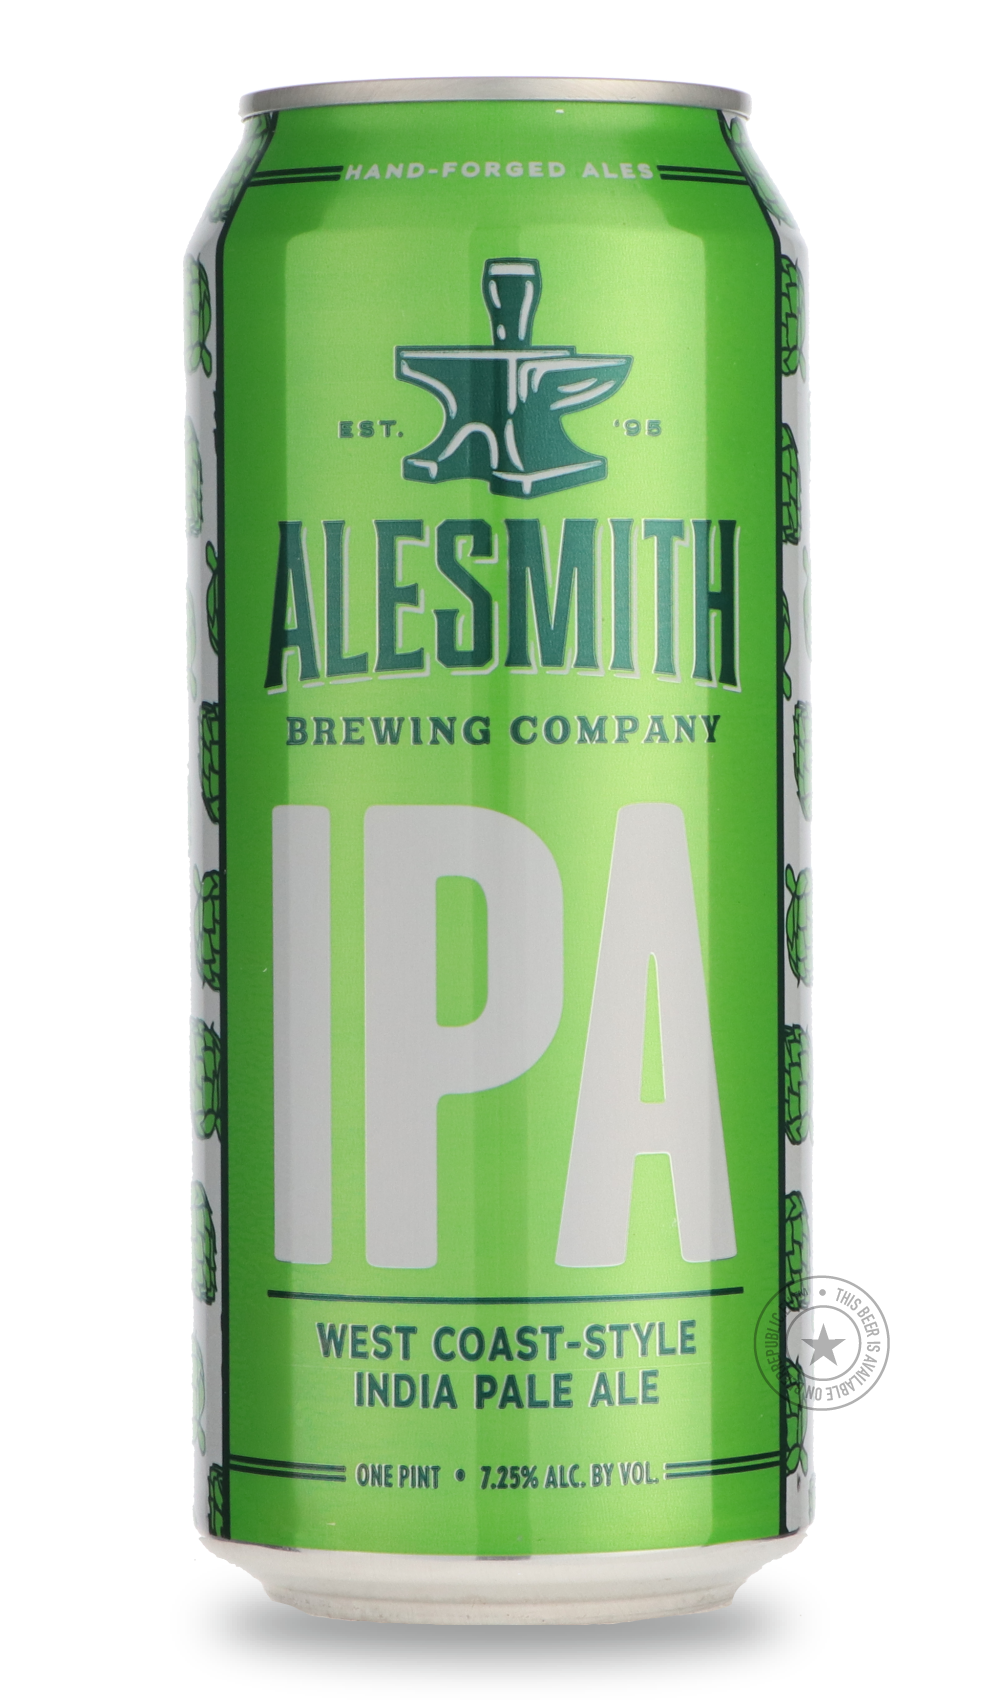 -AleSmith- AleSmith IPA-IPA- Only @ Beer Republic - The best online beer store for American & Canadian craft beer - Buy beer online from the USA and Canada - Bier online kopen - Amerikaans bier kopen - Craft beer store - Craft beer kopen - Amerikanisch bier kaufen - Bier online kaufen - Acheter biere online - IPA - Stout - Porter - New England IPA - Hazy IPA - Imperial Stout - Barrel Aged - Barrel Aged Imperial Stout - Brown - Dark beer - Blond - Blonde - Pilsner - Lager - Wheat - Weizen - Amber - Barley Wi